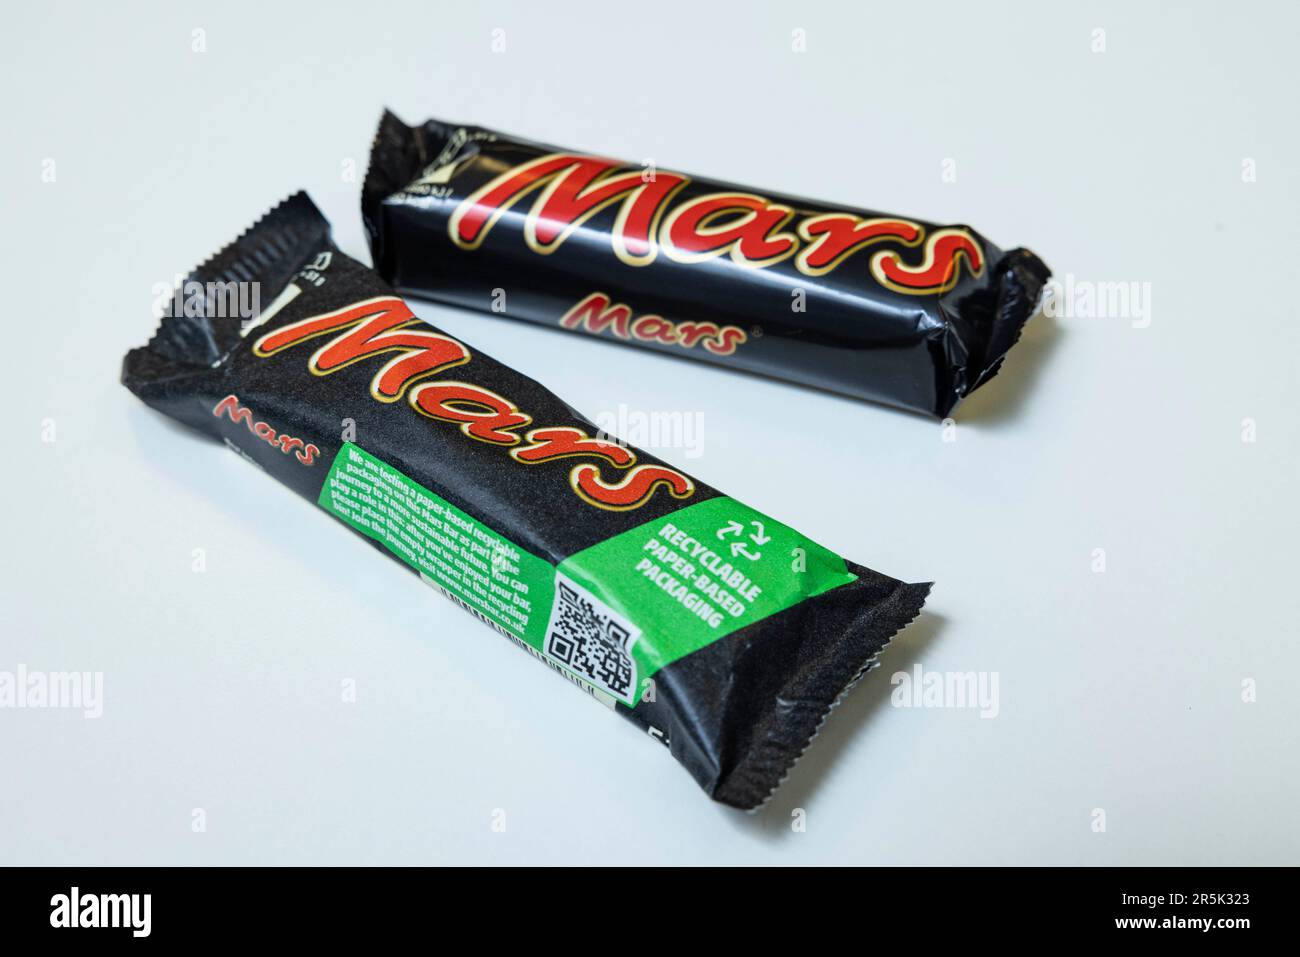 Mars bars to introduce paper wrapping. Stock Photo